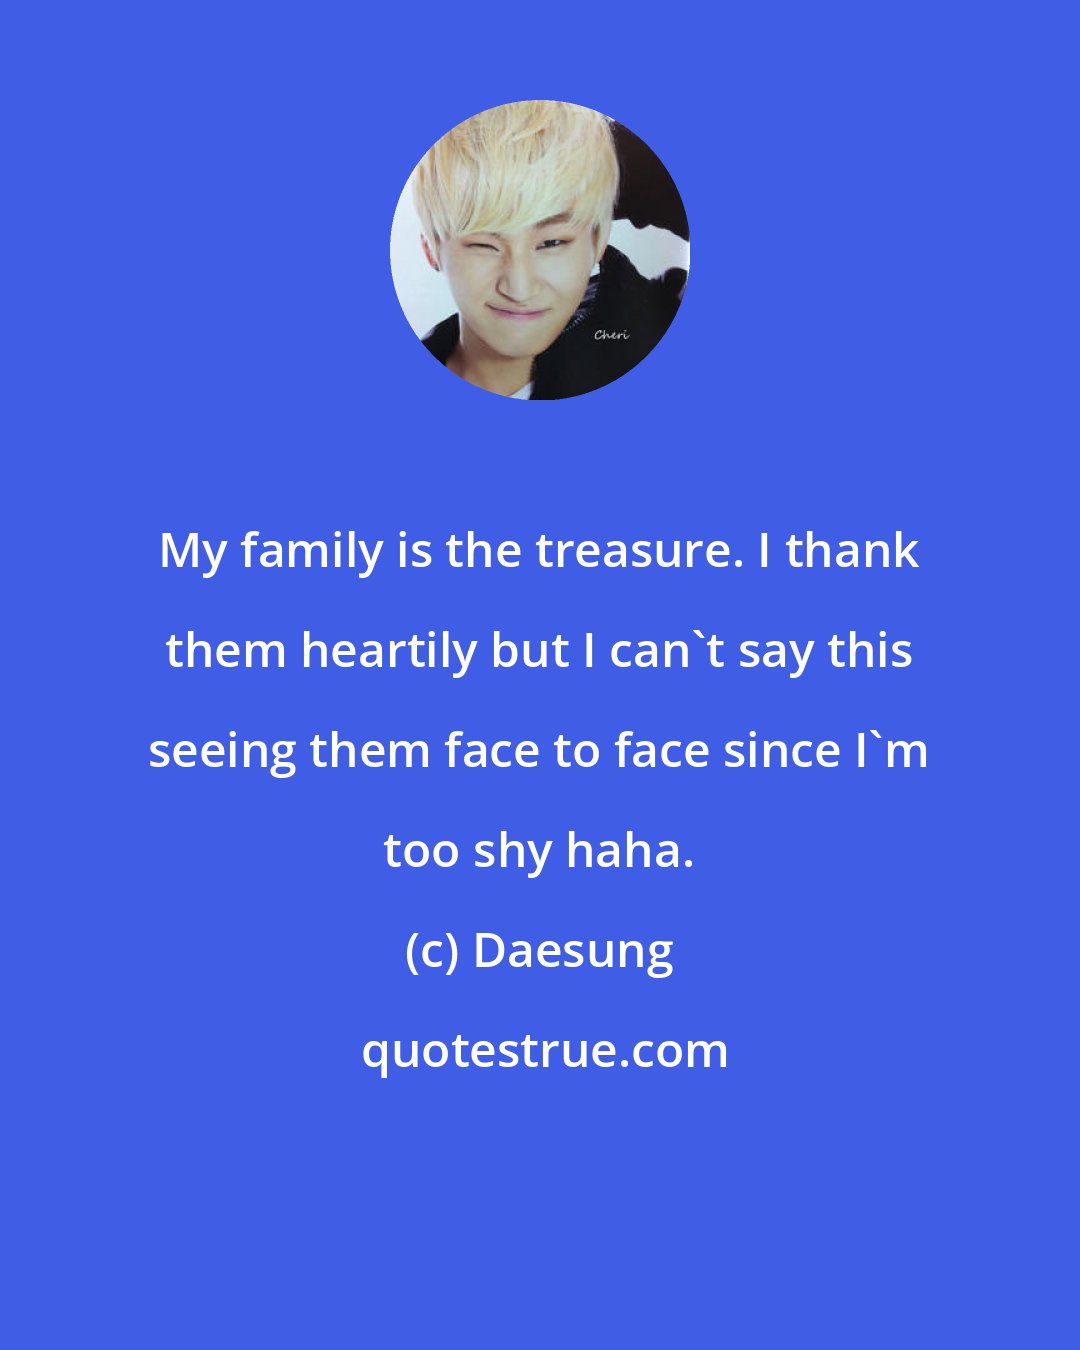 Daesung: My family is the treasure. I thank them heartily but I can't say this seeing them face to face since I'm too shy haha.